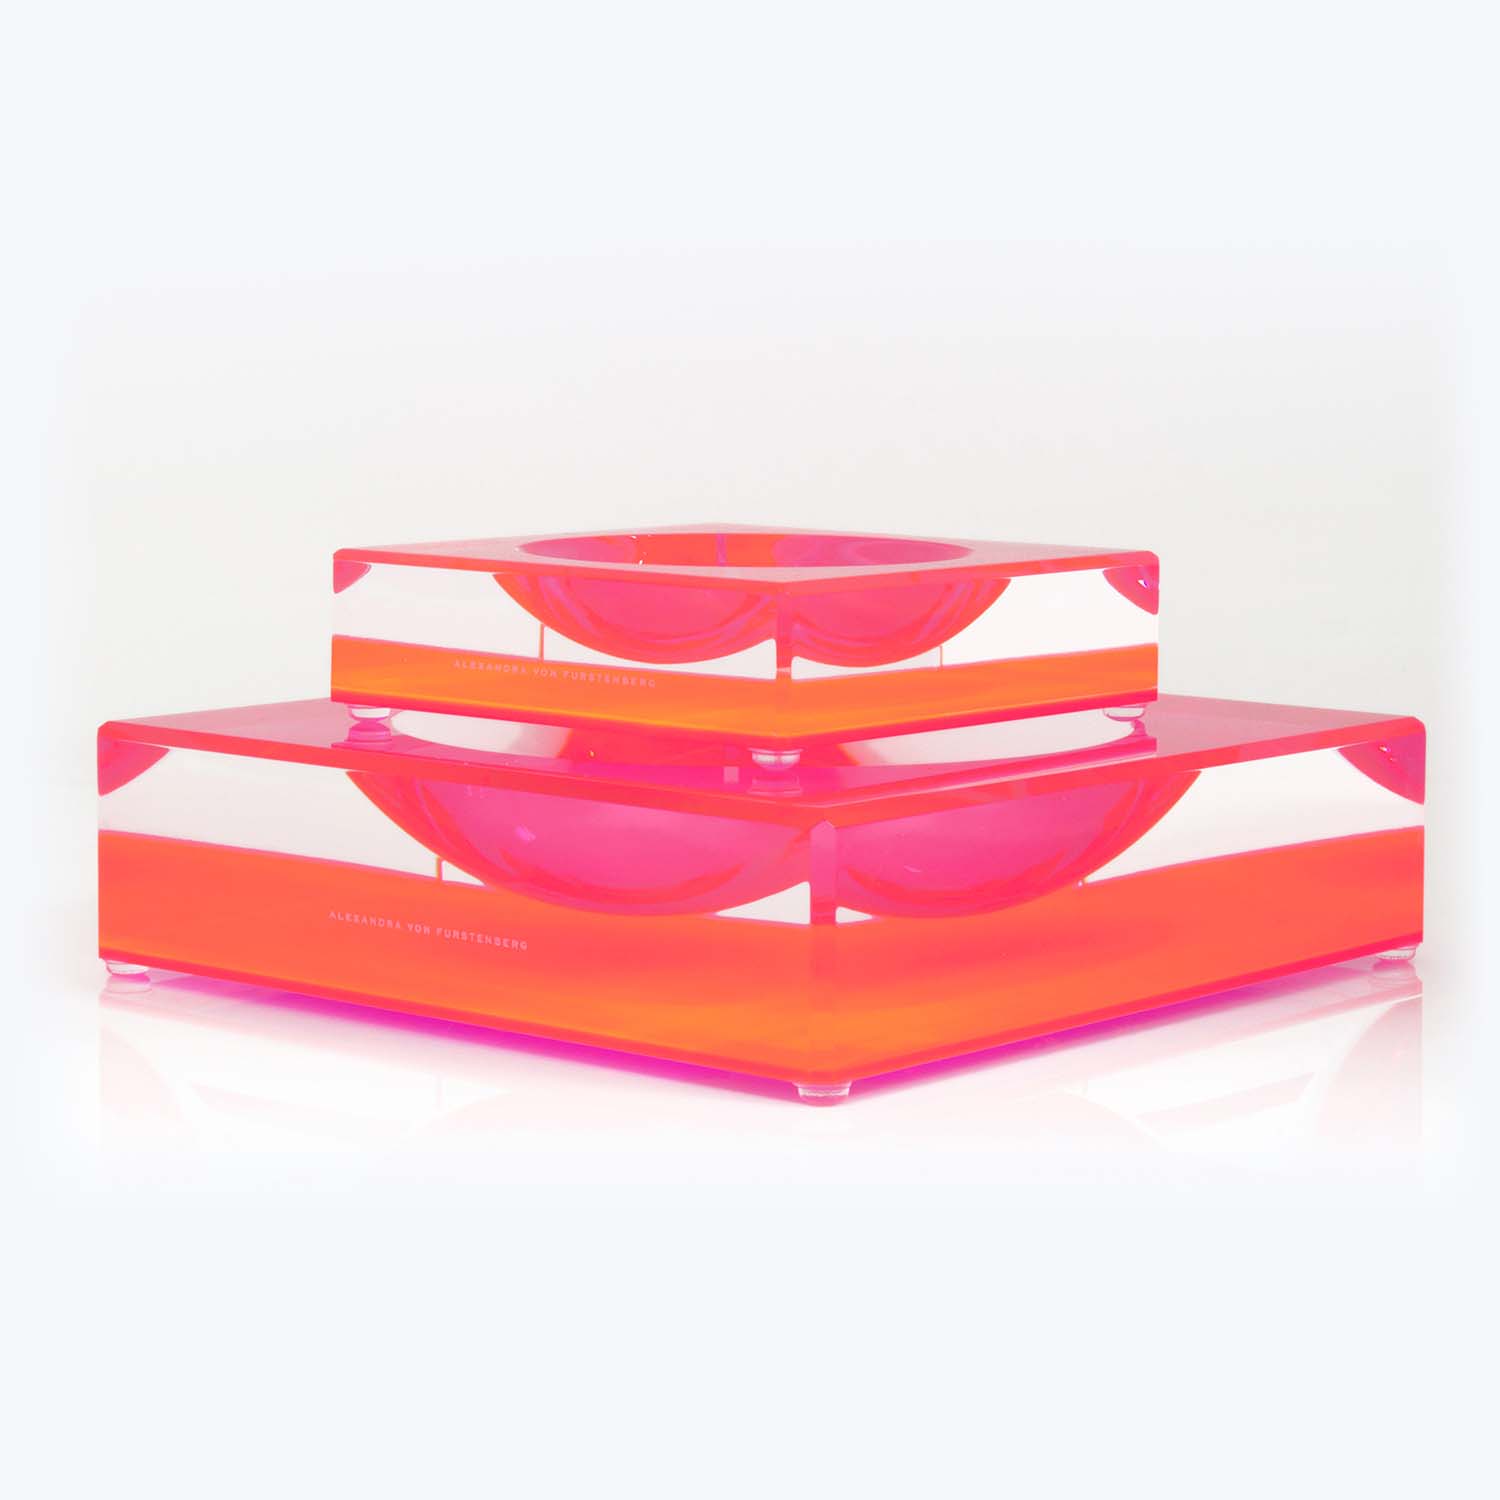 Contemporary acrylic tray with gradient colors, by Alexandra Von Furstenberg.